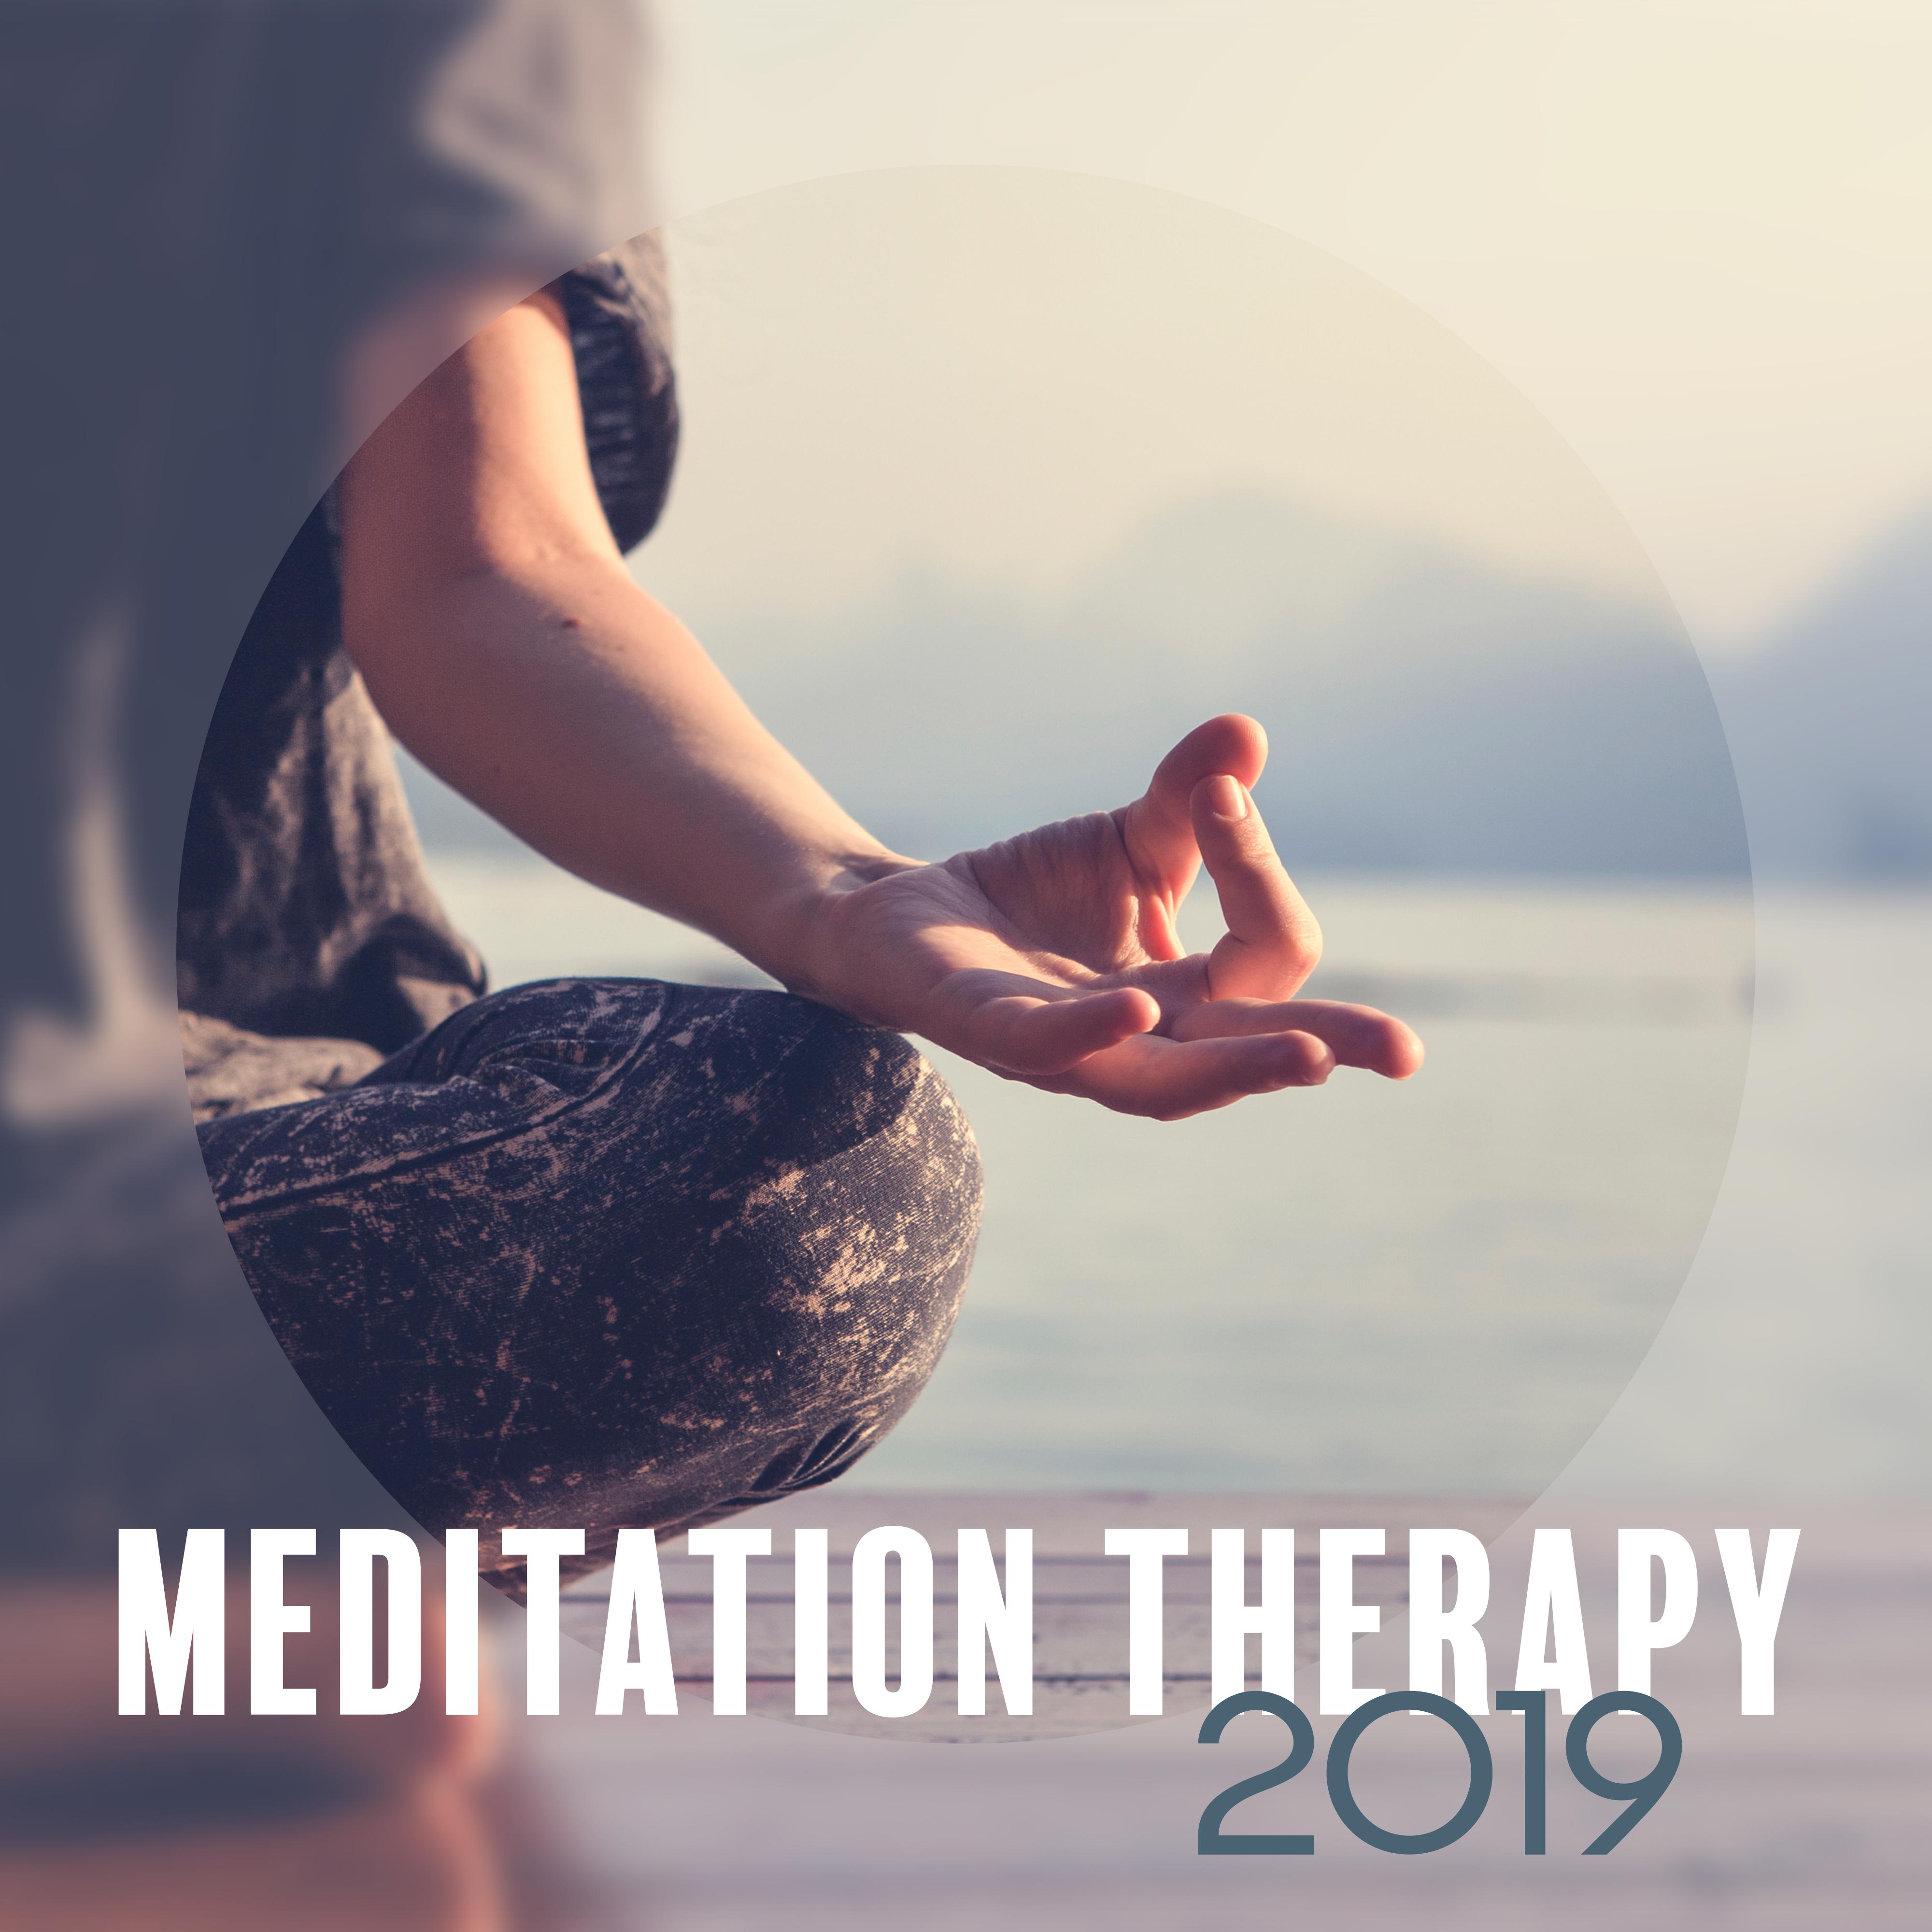 Meditation Therapy 2019 – Calming Sounds for Relaxation, Deep Meditation, Yoga, Total Meditation Awareness, Meditation Music Zone, Stress Relief